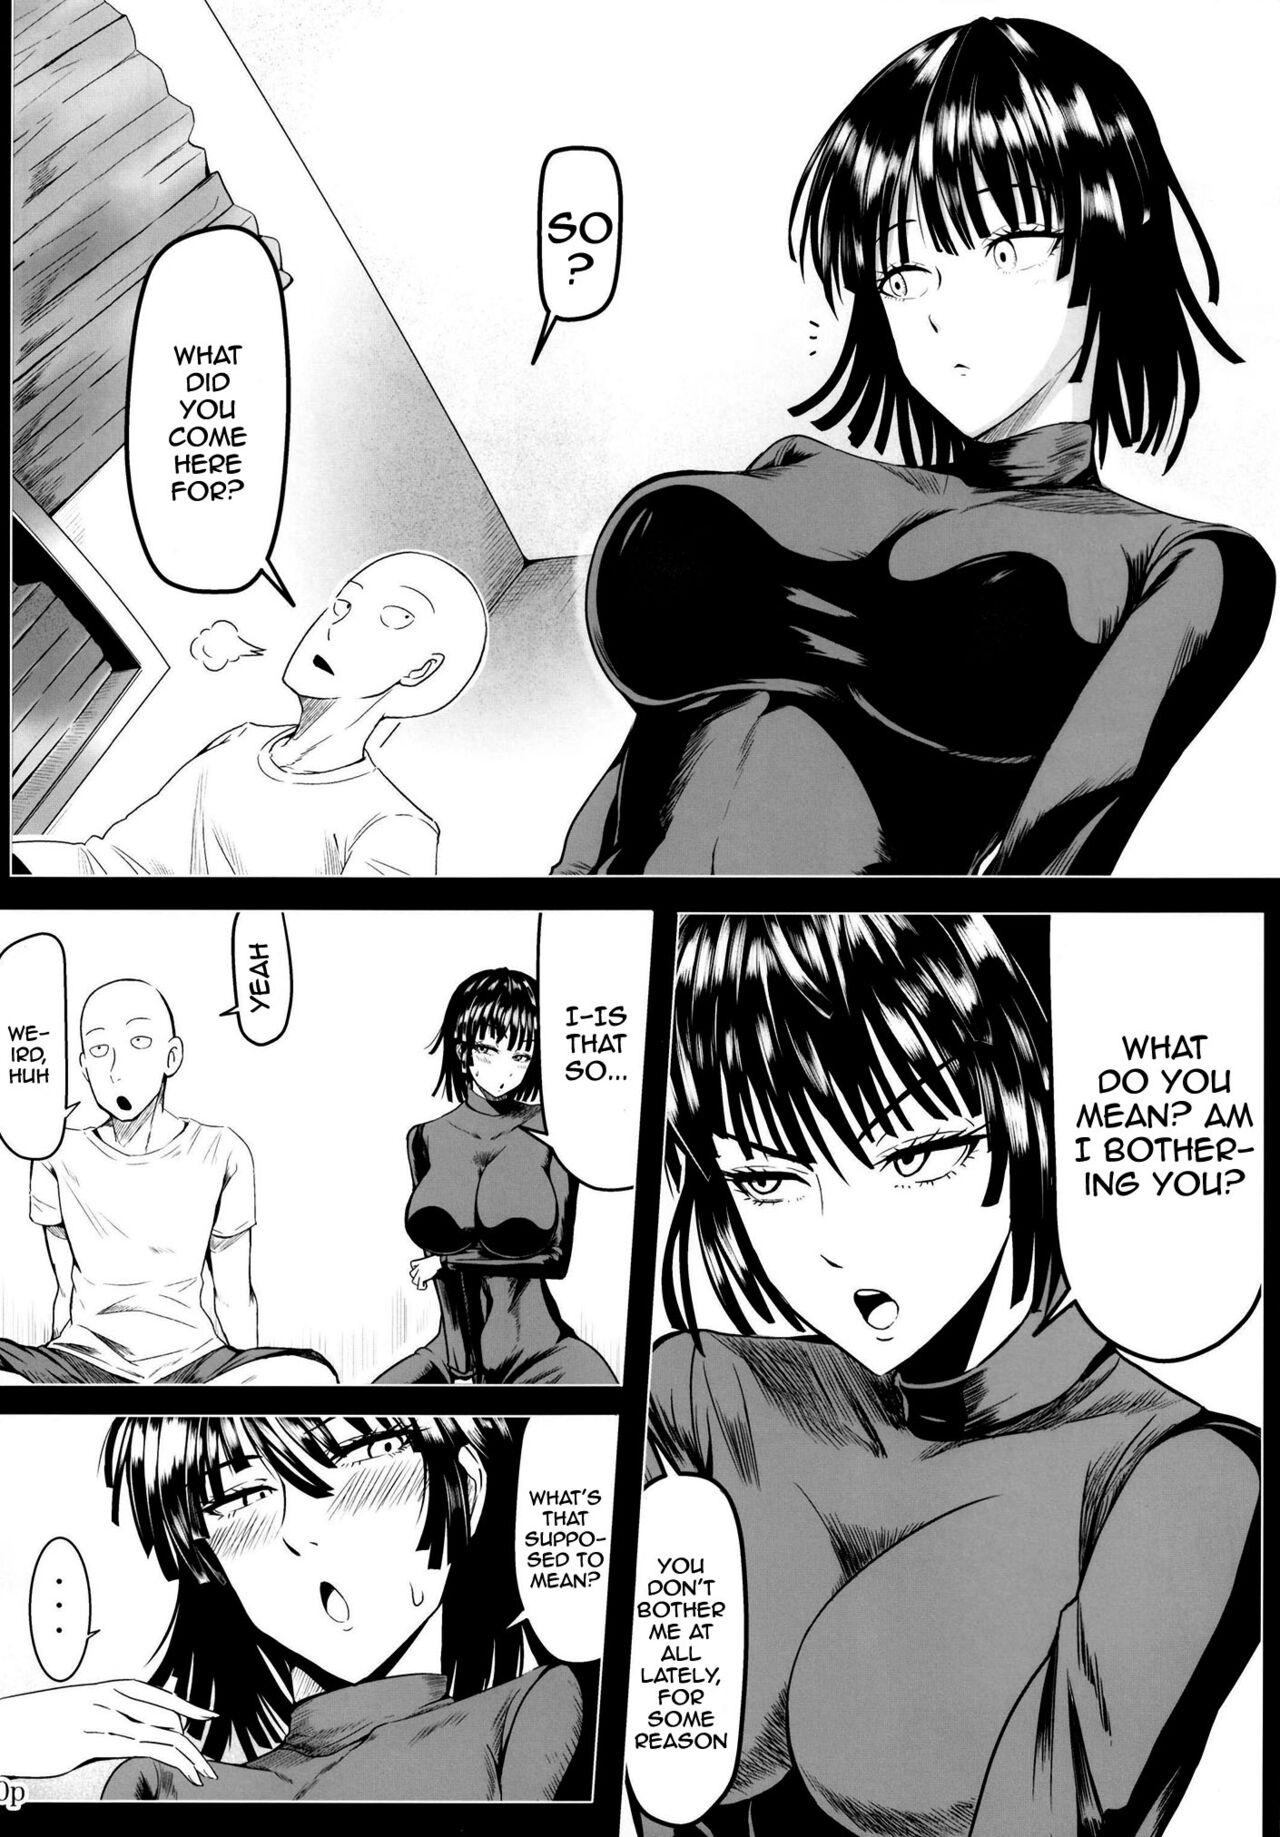 Softcore Dekoboko Love sister 5-gekime | Odd Love Sister 5 - One punch man Whipping - Page 8